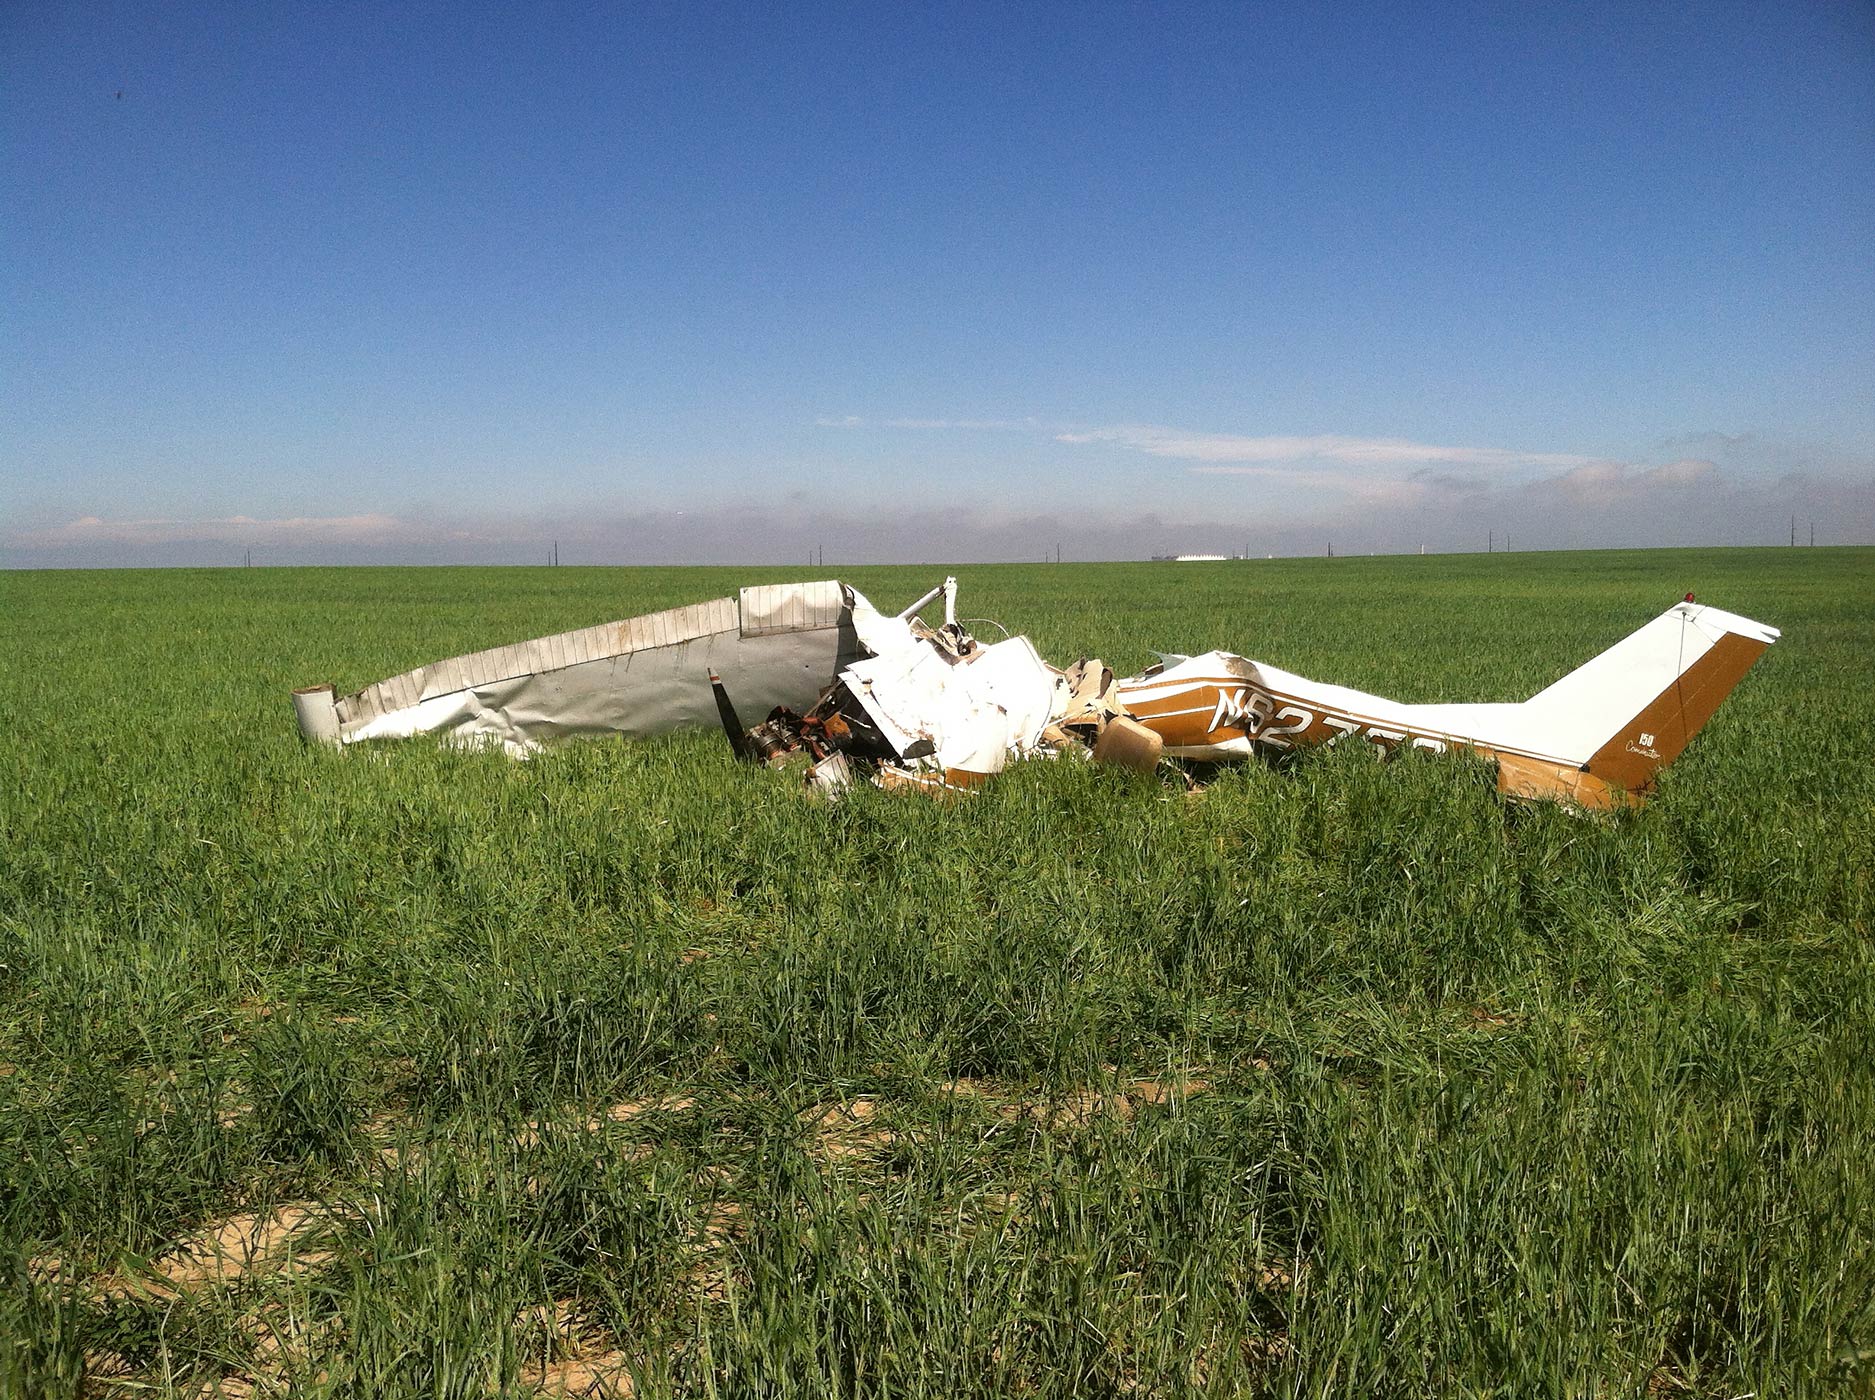 File photo of the wreckage of a crashed Cessna 150 airplane lying in a field near Watkins, Colorado